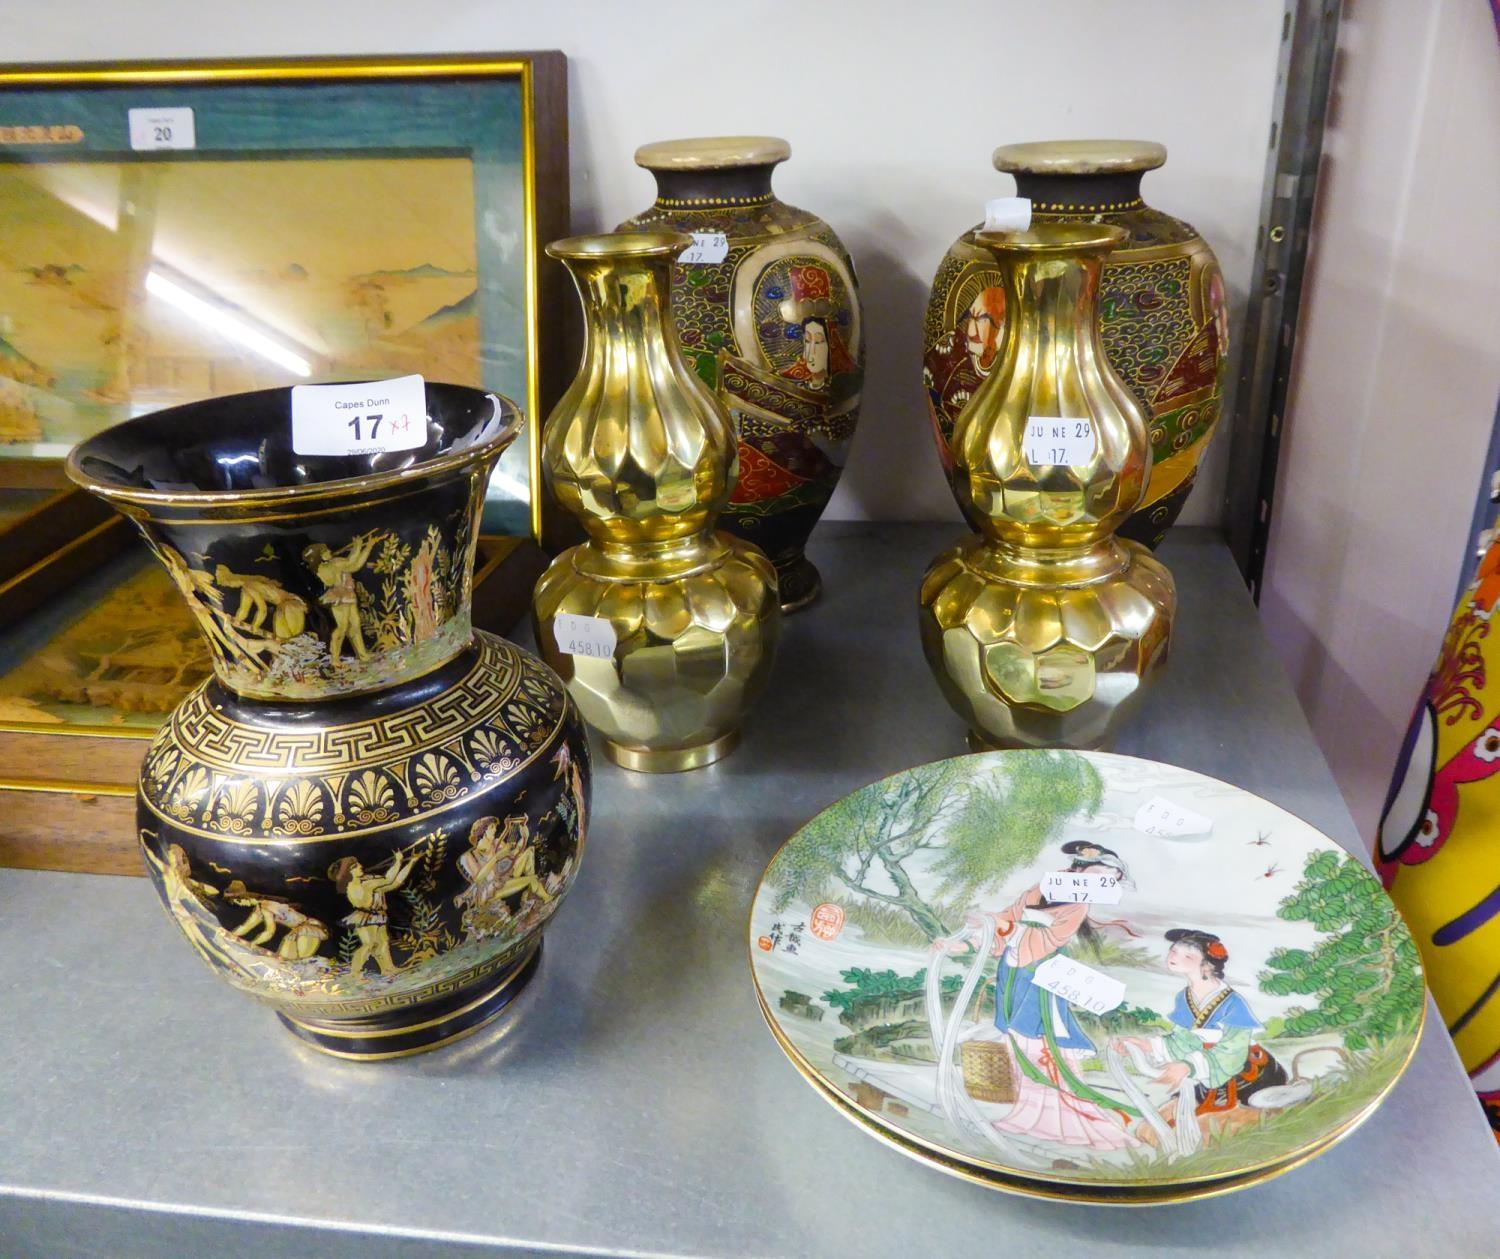 A PAIR OF DECORATIVE SATSUMA VASES, A GREEK DECORATED VASE, A PAIR OF CHINESE BRASS VASES AND A PAIR